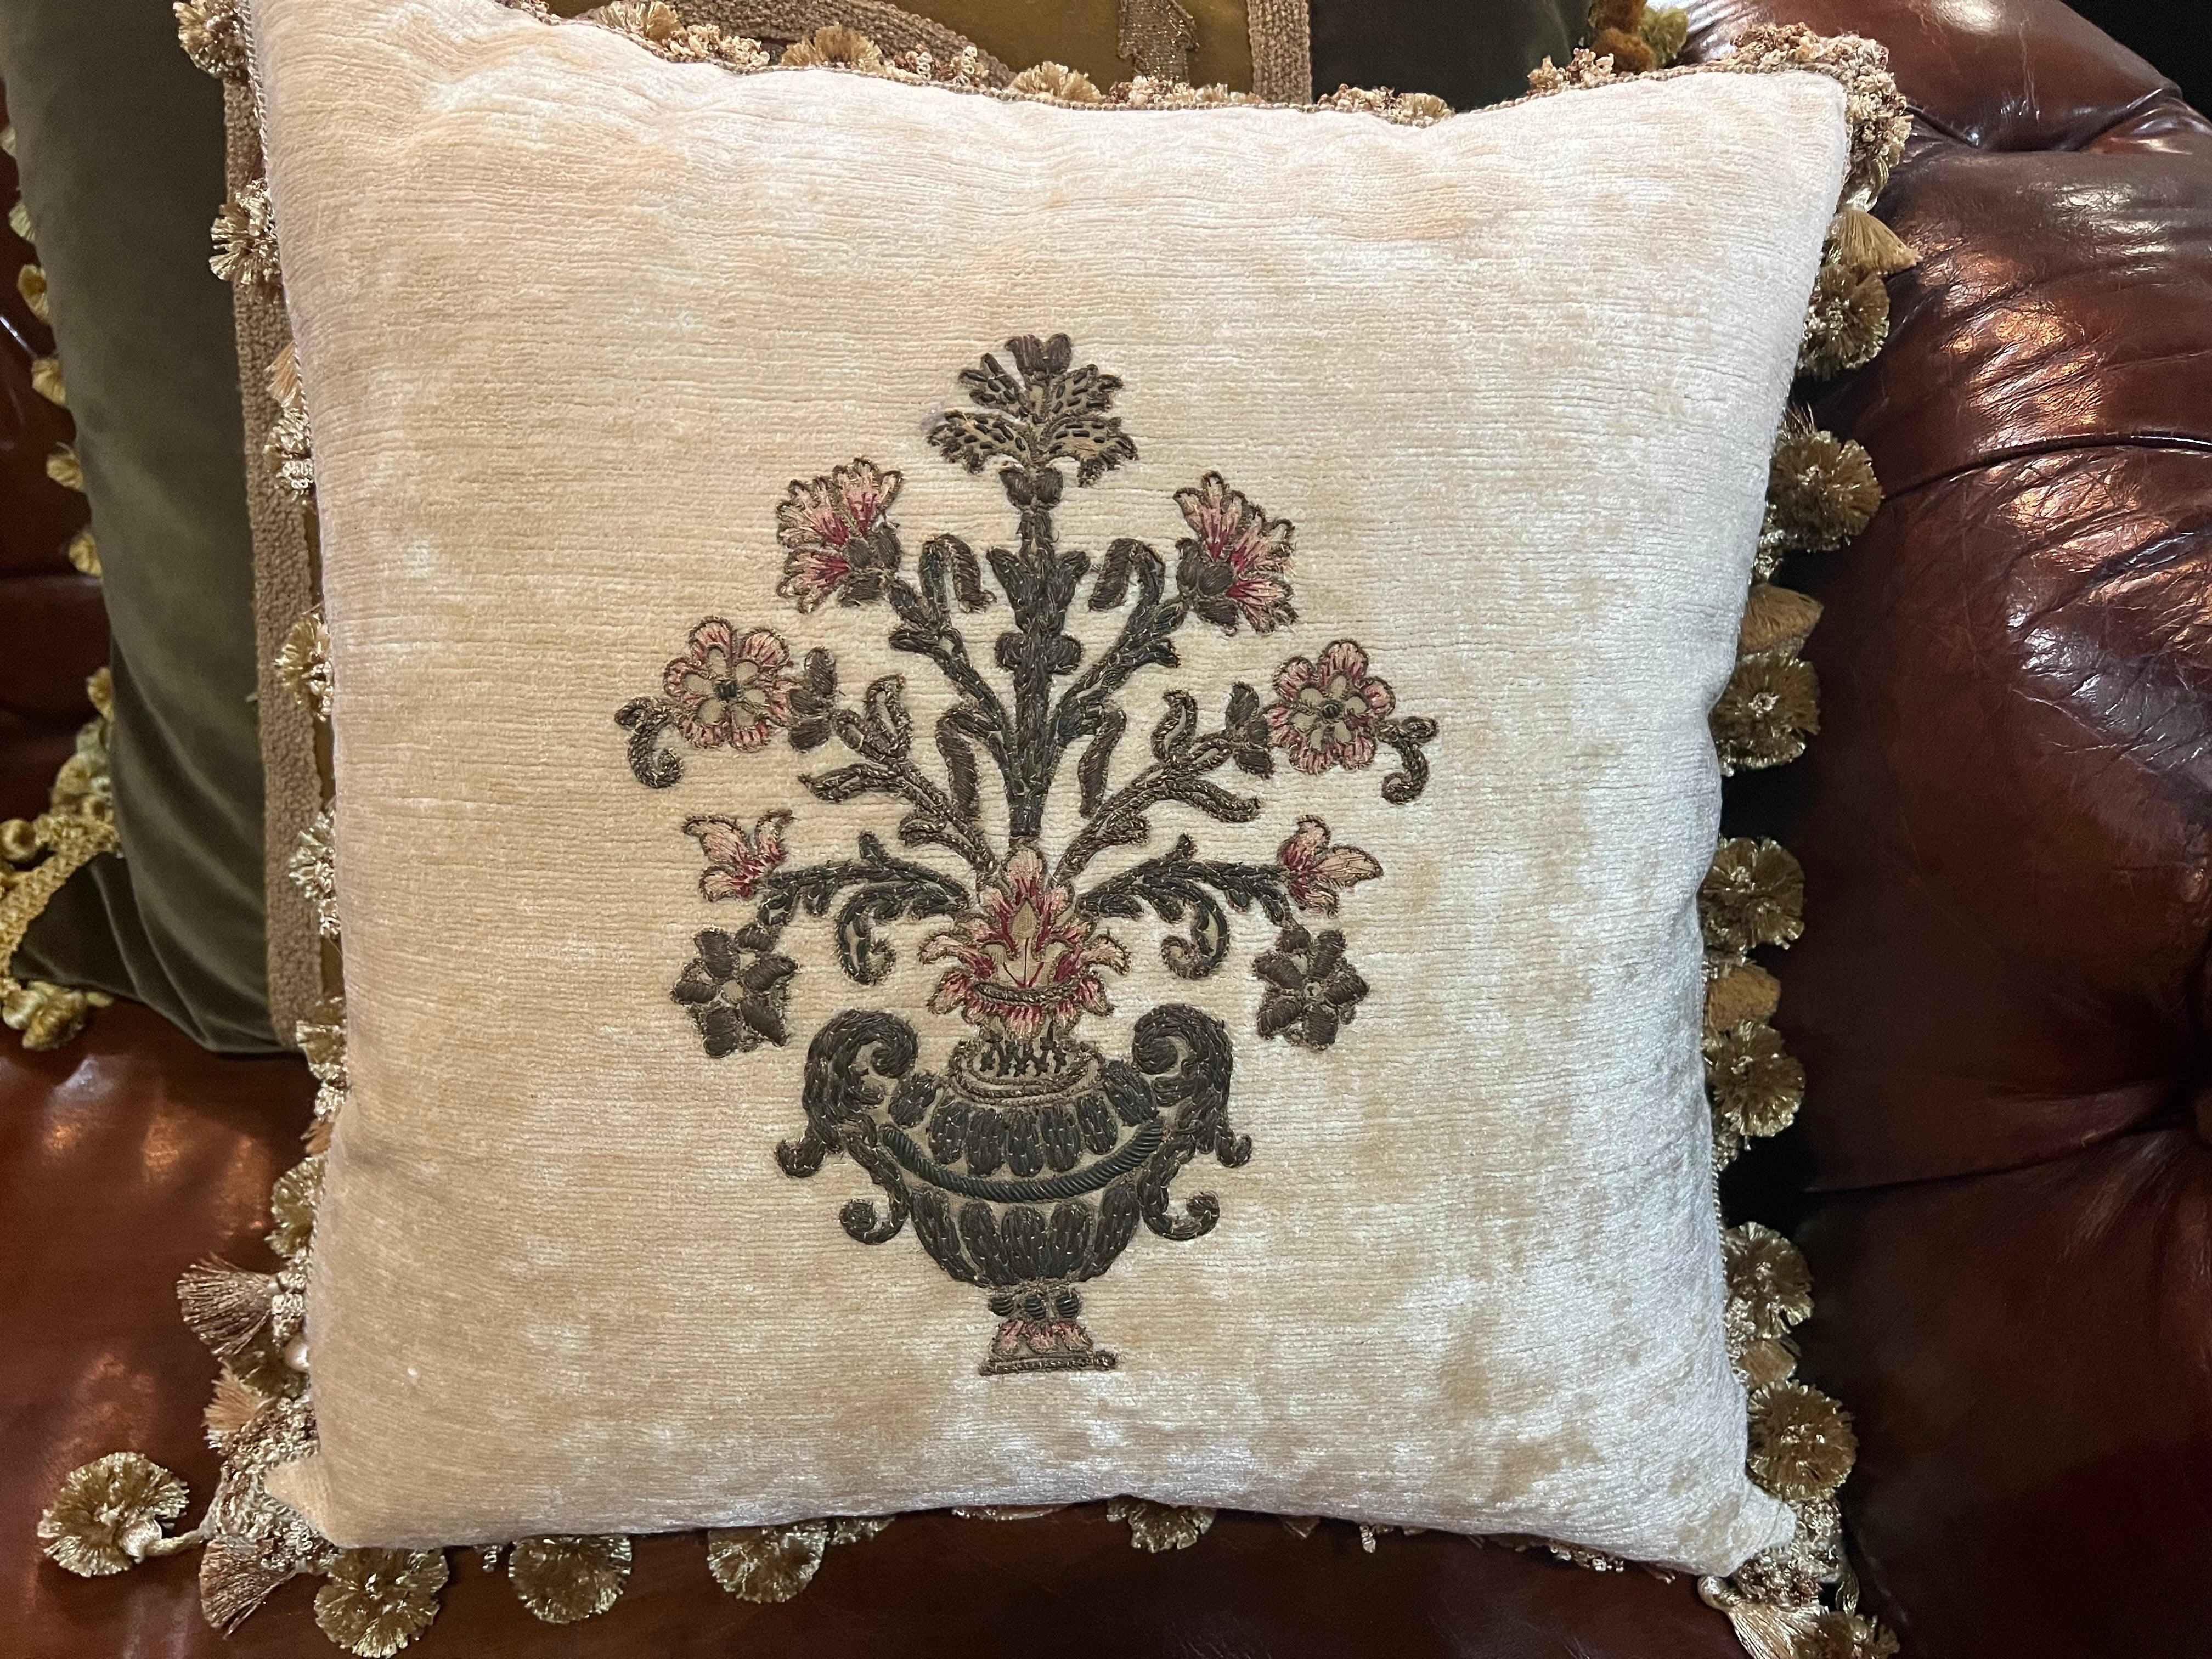 Custom pillows using part of client's original pillows.  We will hand sew 19th century appliques on new fabric and incorporate with client's border fabric.  Down inserts. Zipper closures.